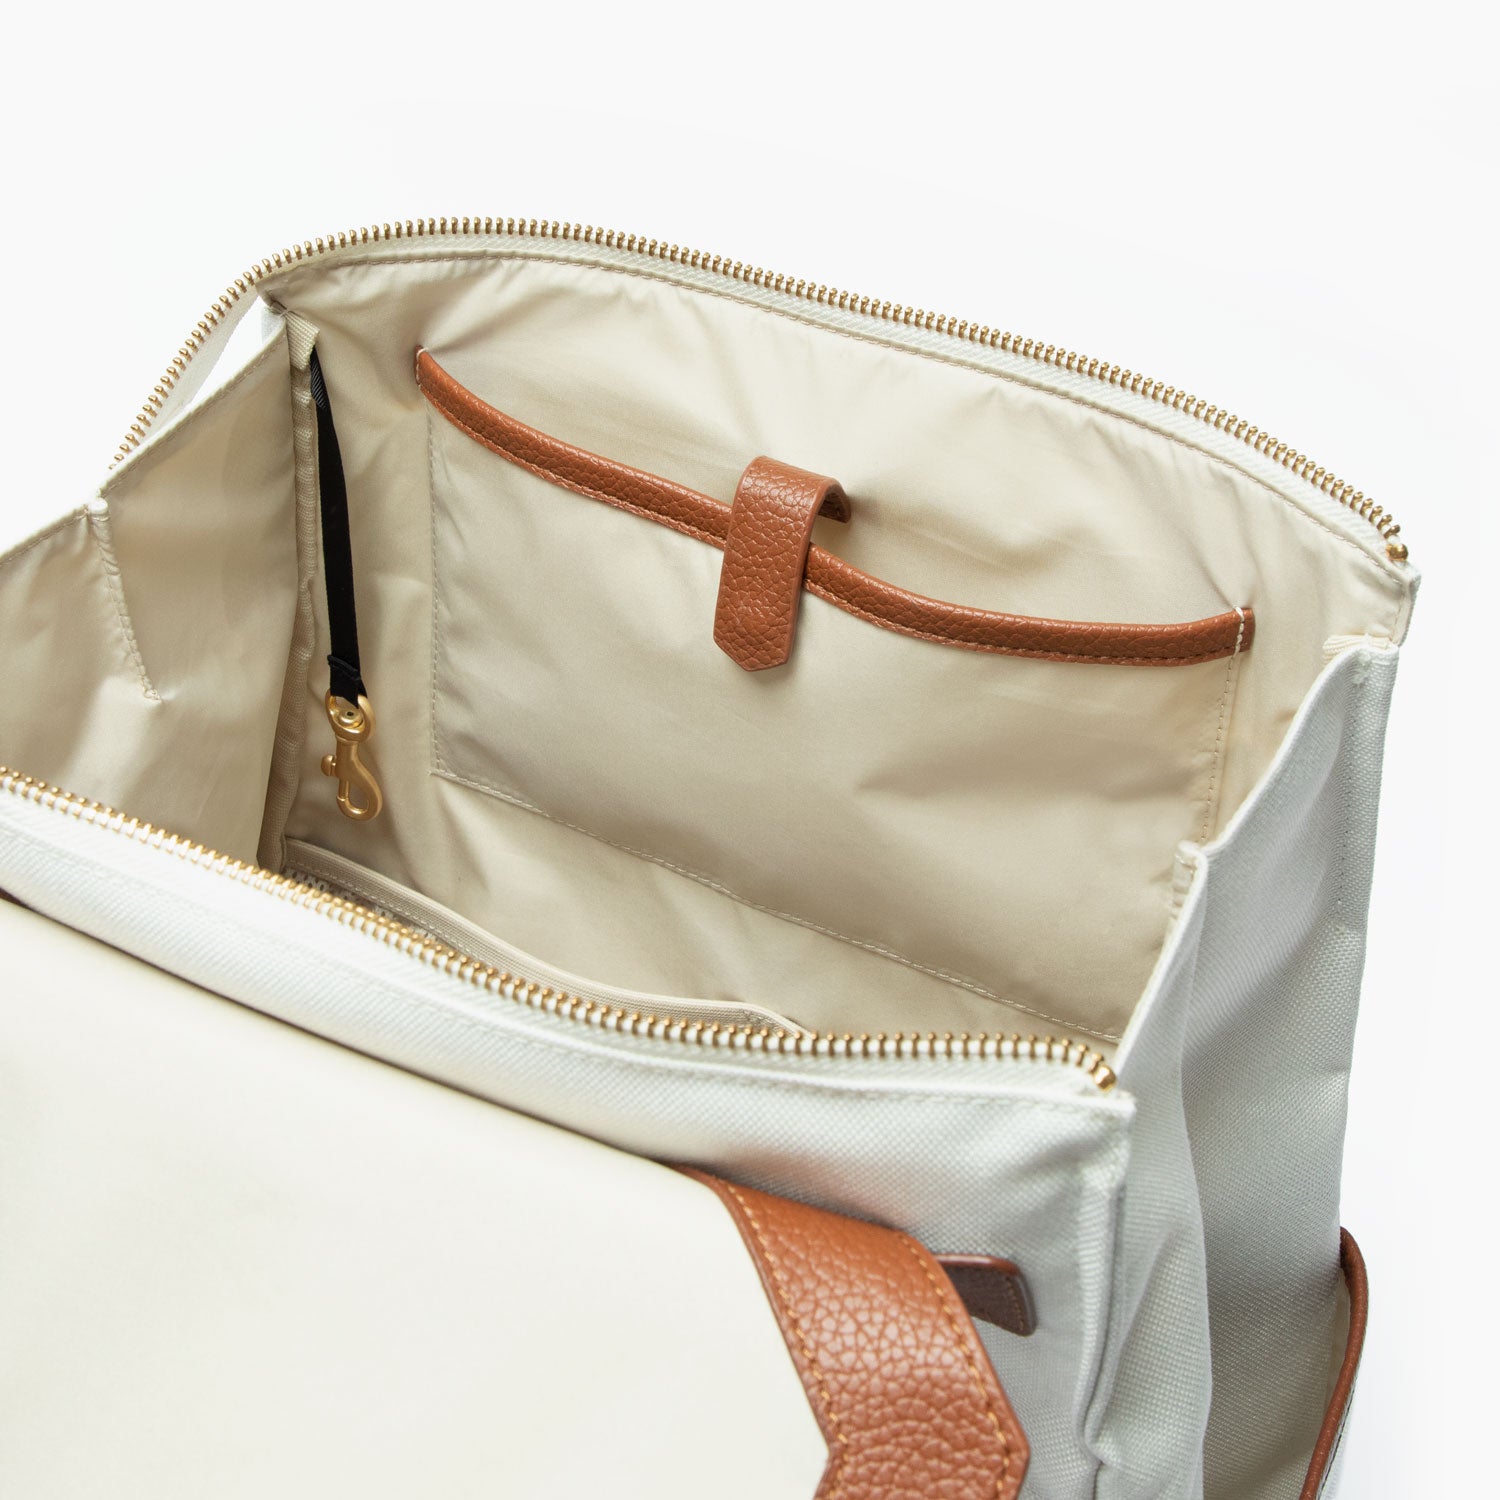 Freshly Picked - The 🐚 Birch Classic Diaper Bag 🐚 is back